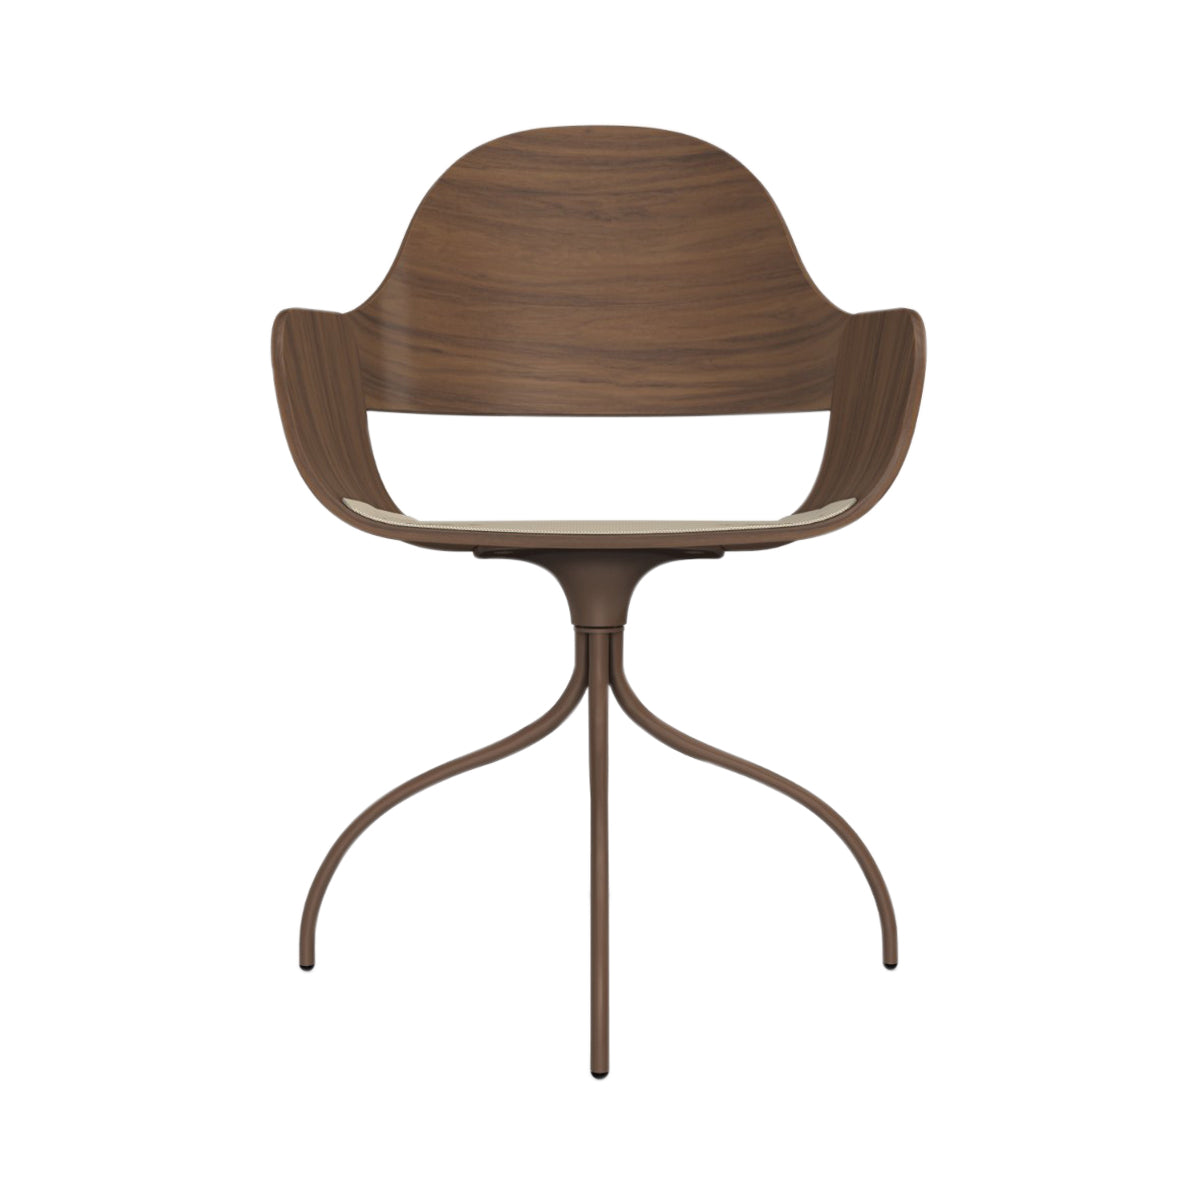 Showtime Nude Chair with Swivel Base: Seat Upholstered + Walnut + Pale Brown